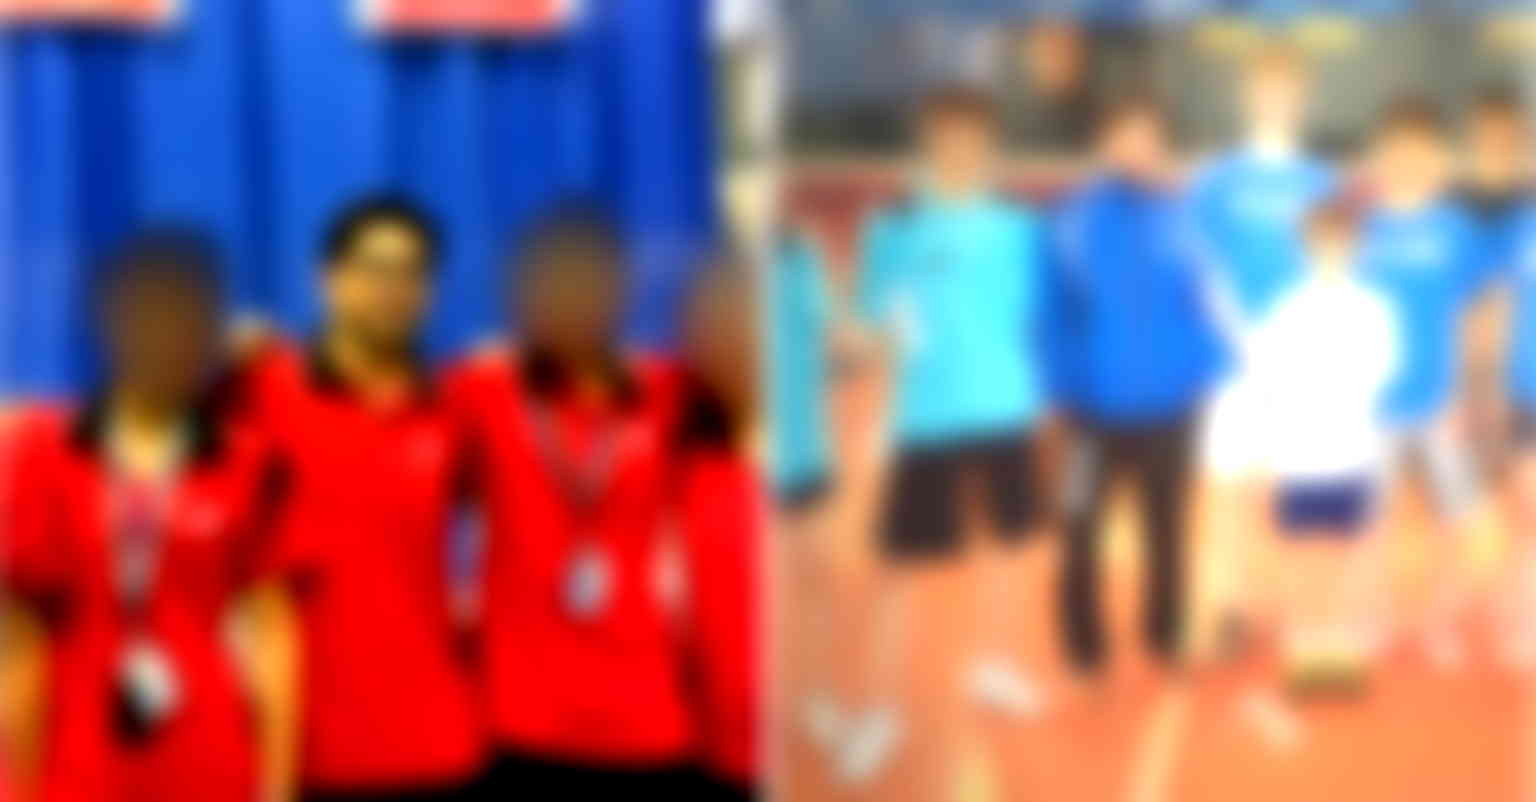 ‘I Like Asian Girls’ Calves’ Badminton Coach Fired After Numerous Reports of Se‌x‌u‌a‌l M‌is‌co‌nd‌uc‌t